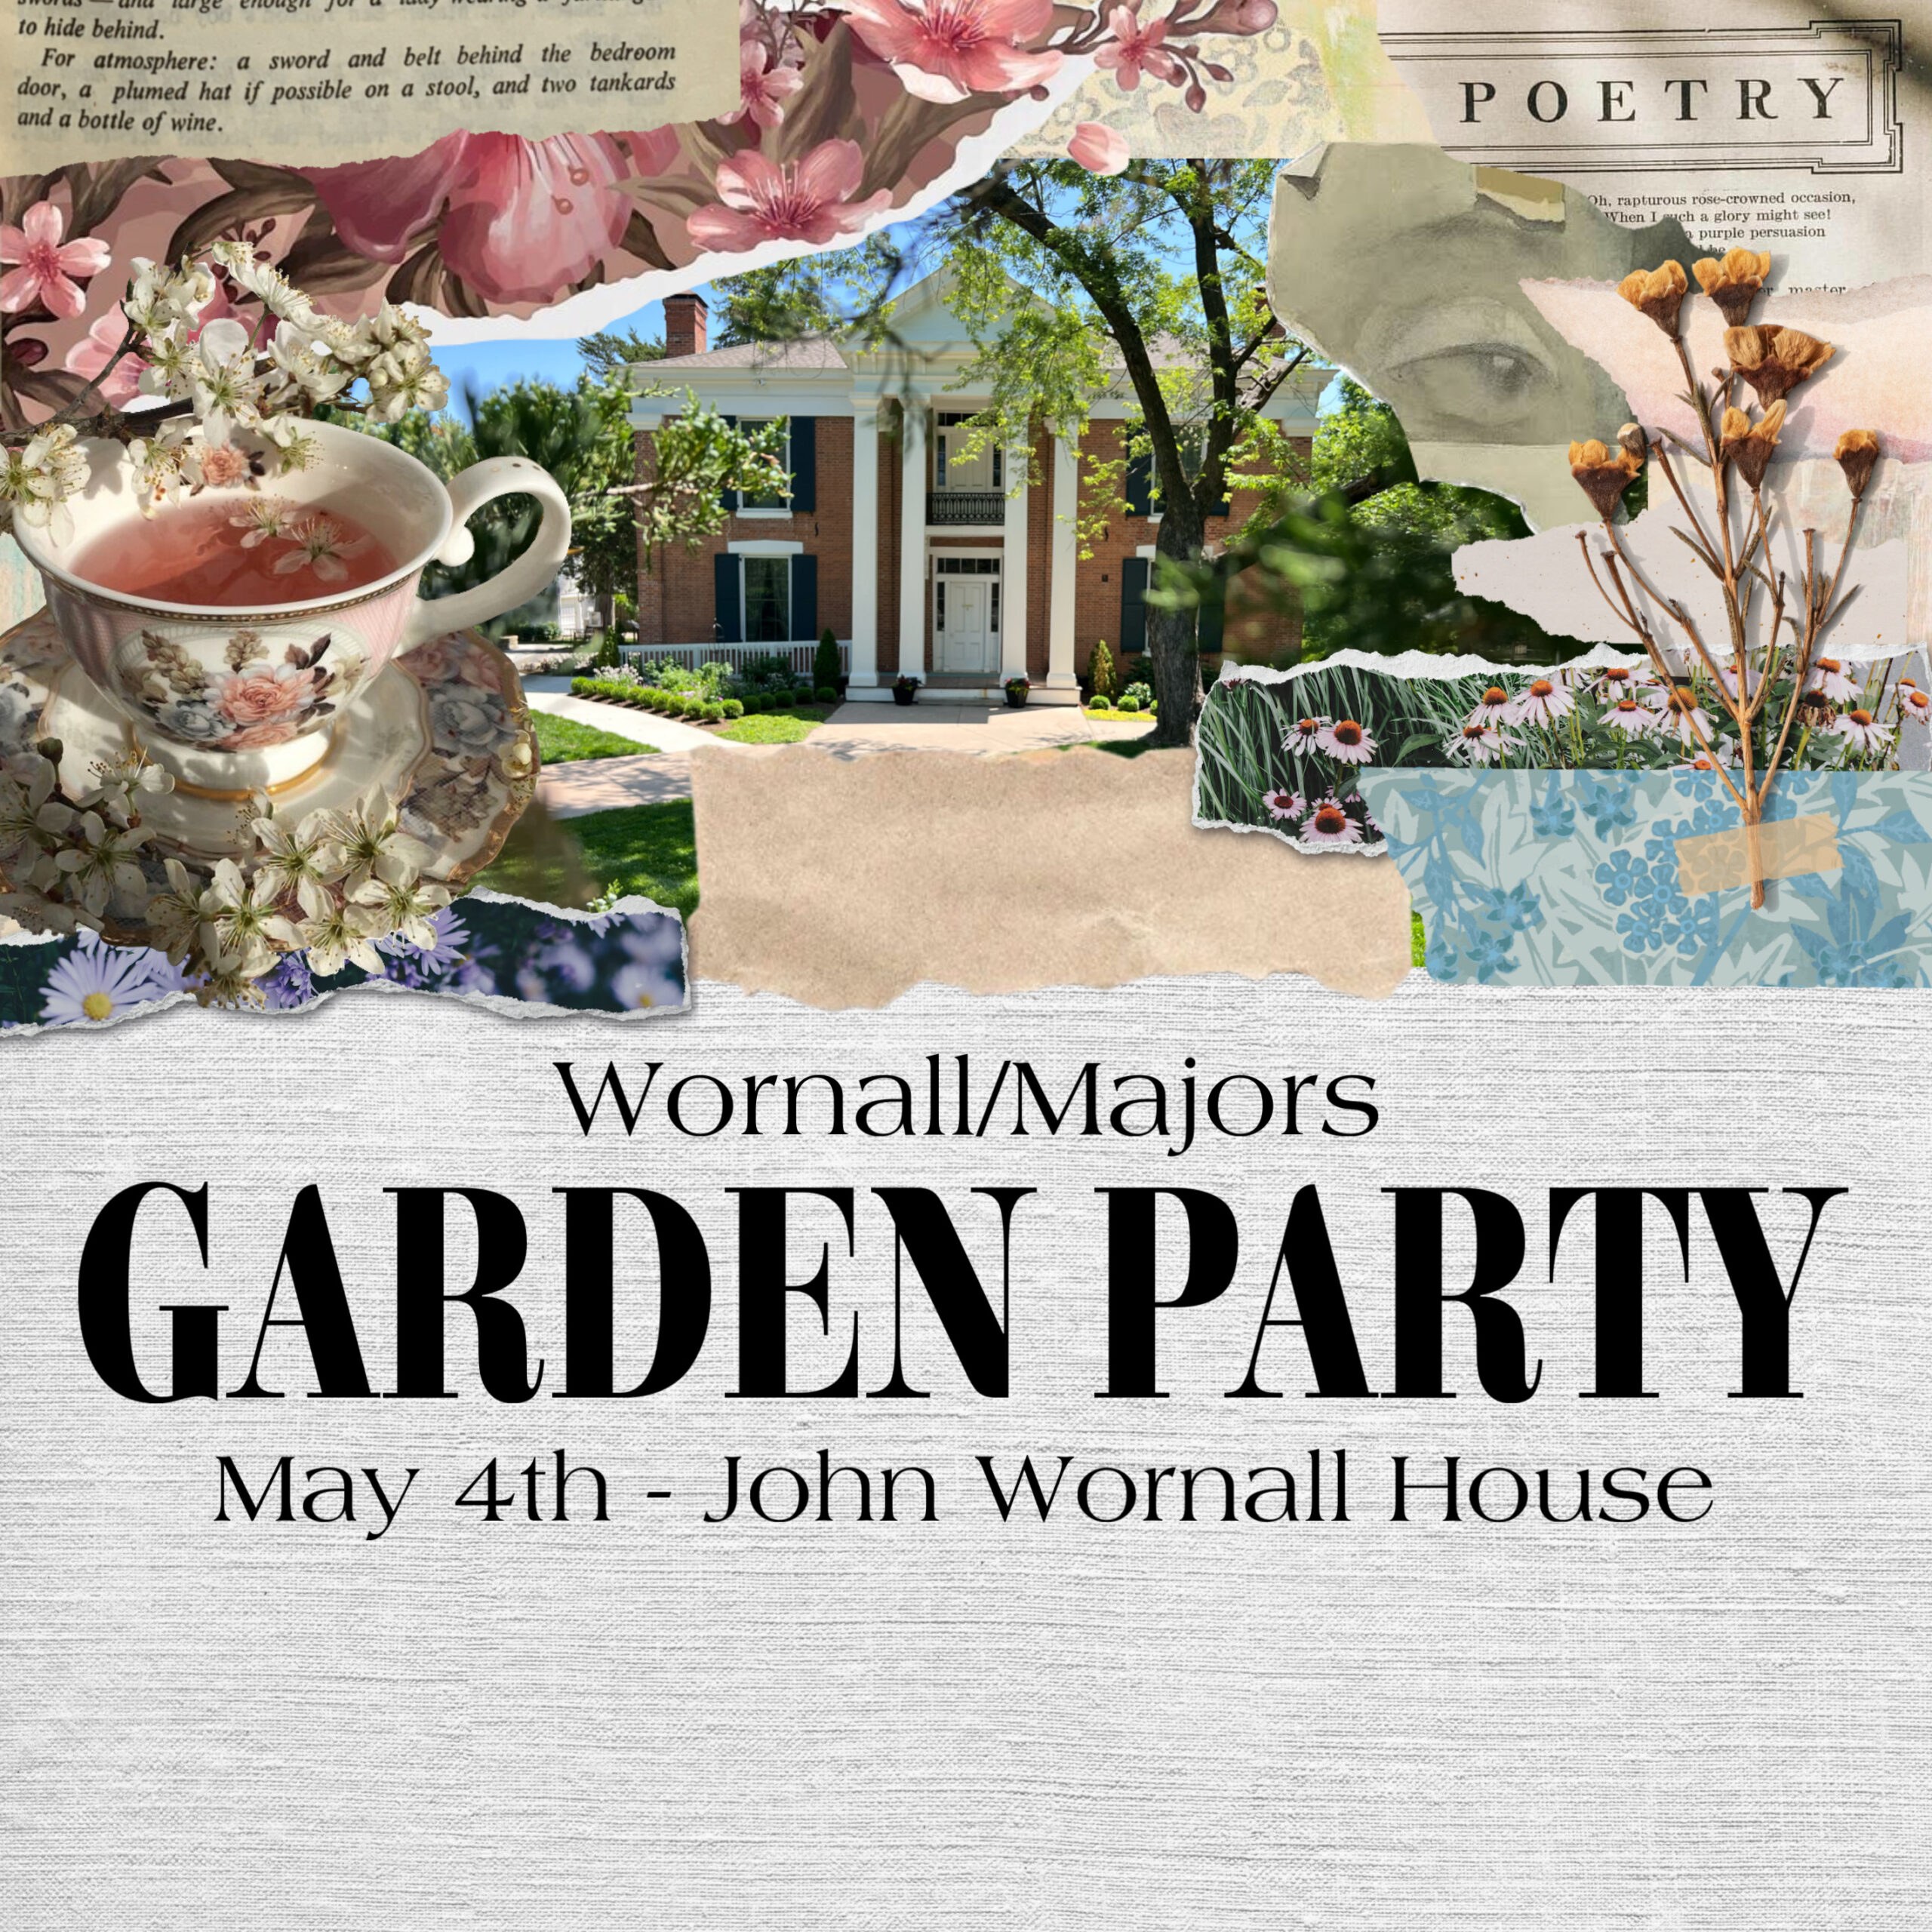 Thumbnail for the post titled: Wornall/Majors Garden Party